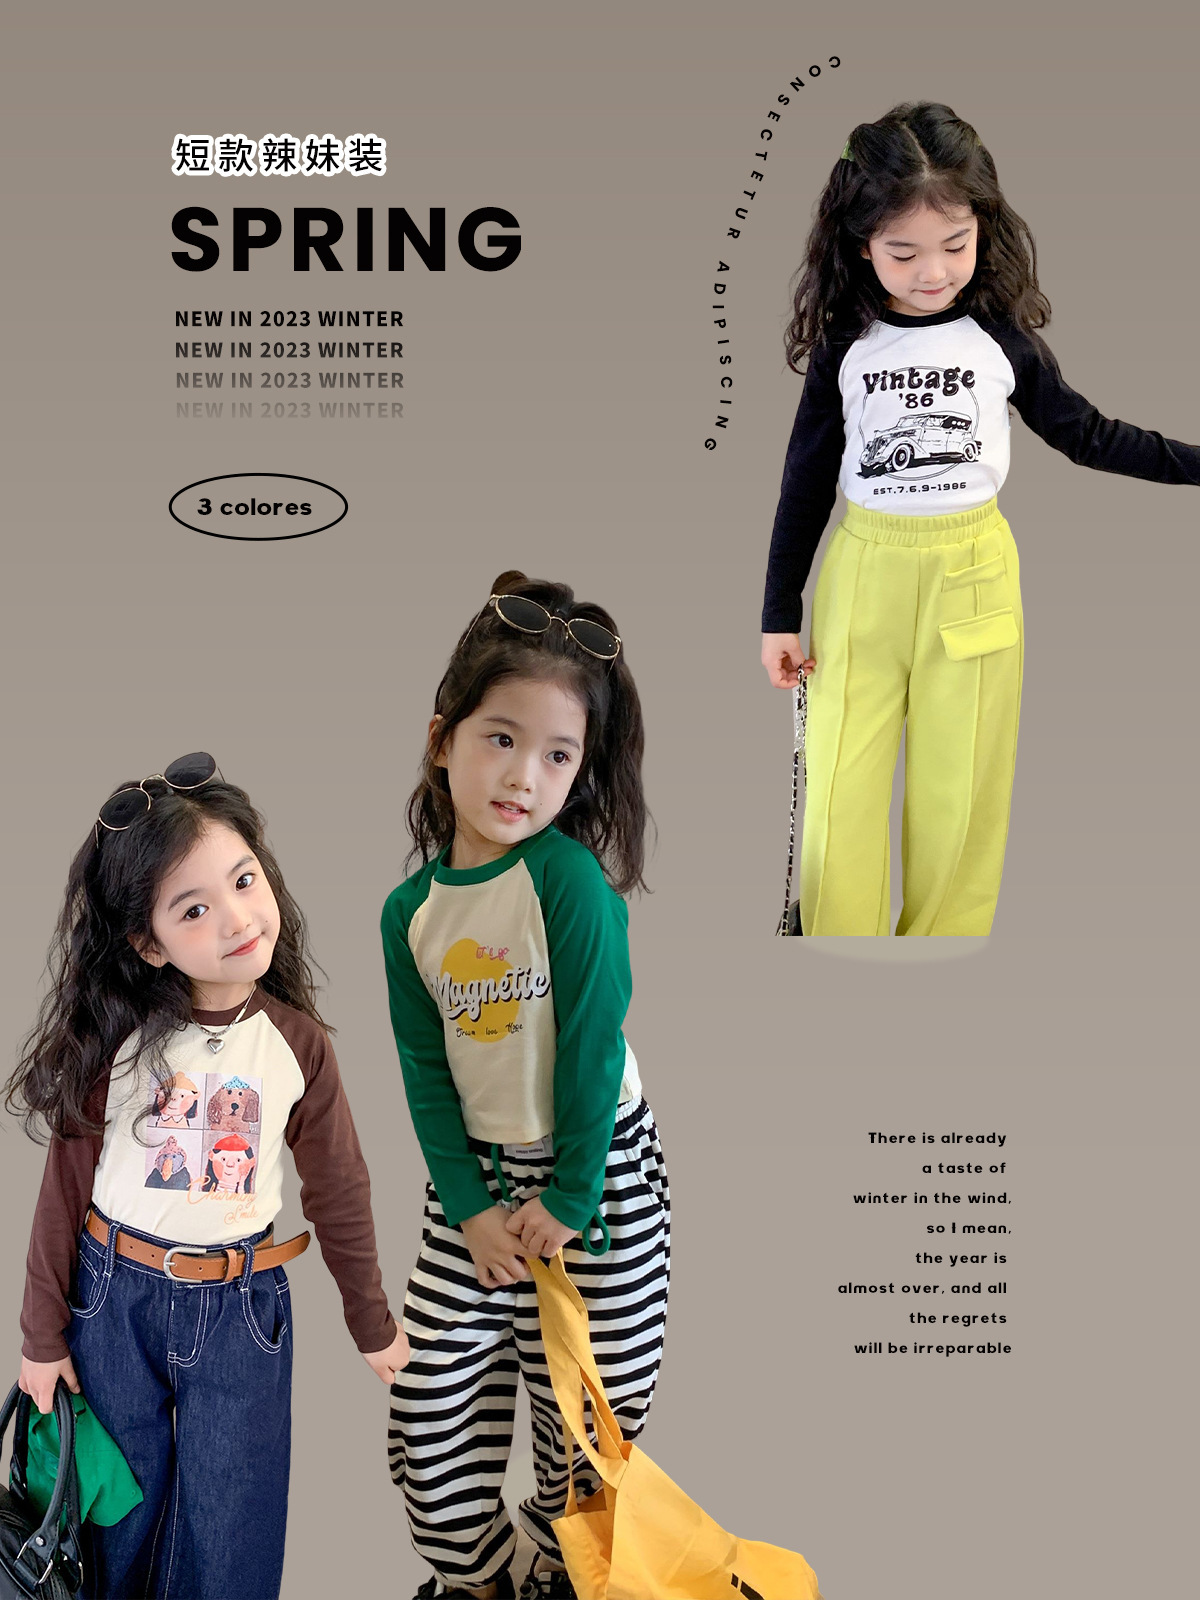 2023 new pattern girl Long sleeve T-shirt children spring clothes Hit color Base coat Versatile have cash less than that is registered in the accounts Spice Girls baby jacket